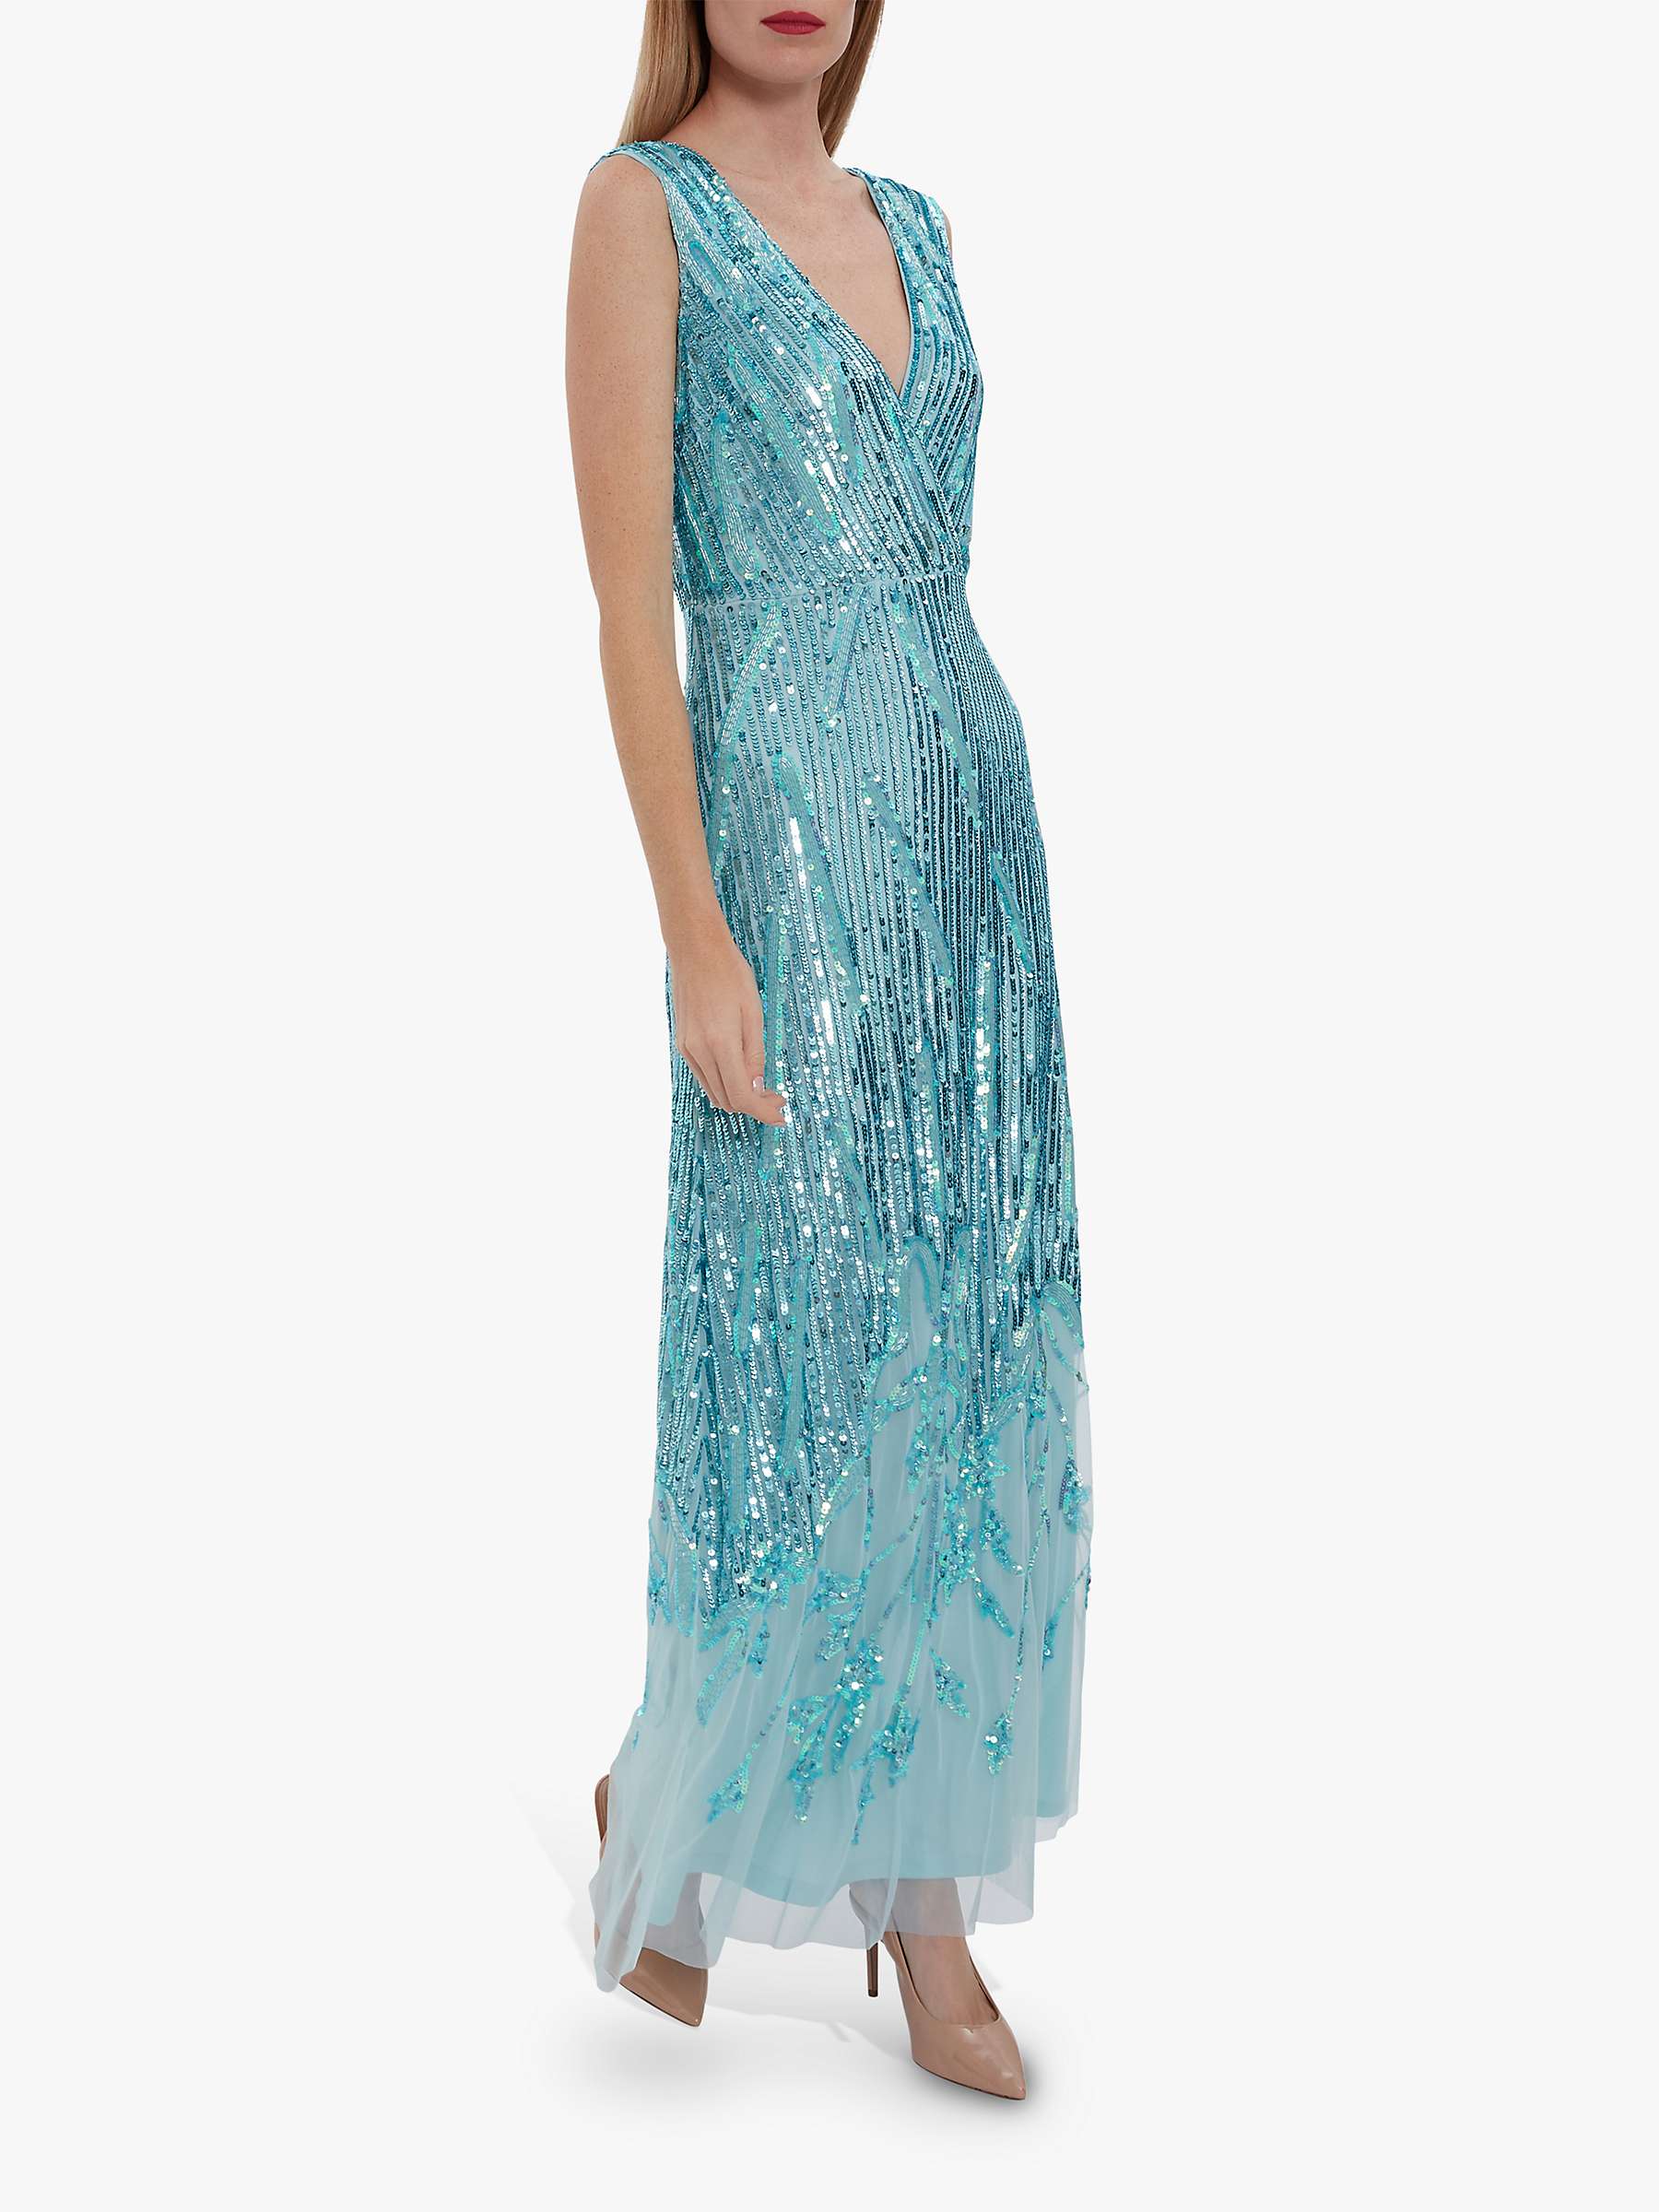 Buy Gina Bacconi Nixie Sequin Maxi Dress, Turquoise Online at johnlewis.com